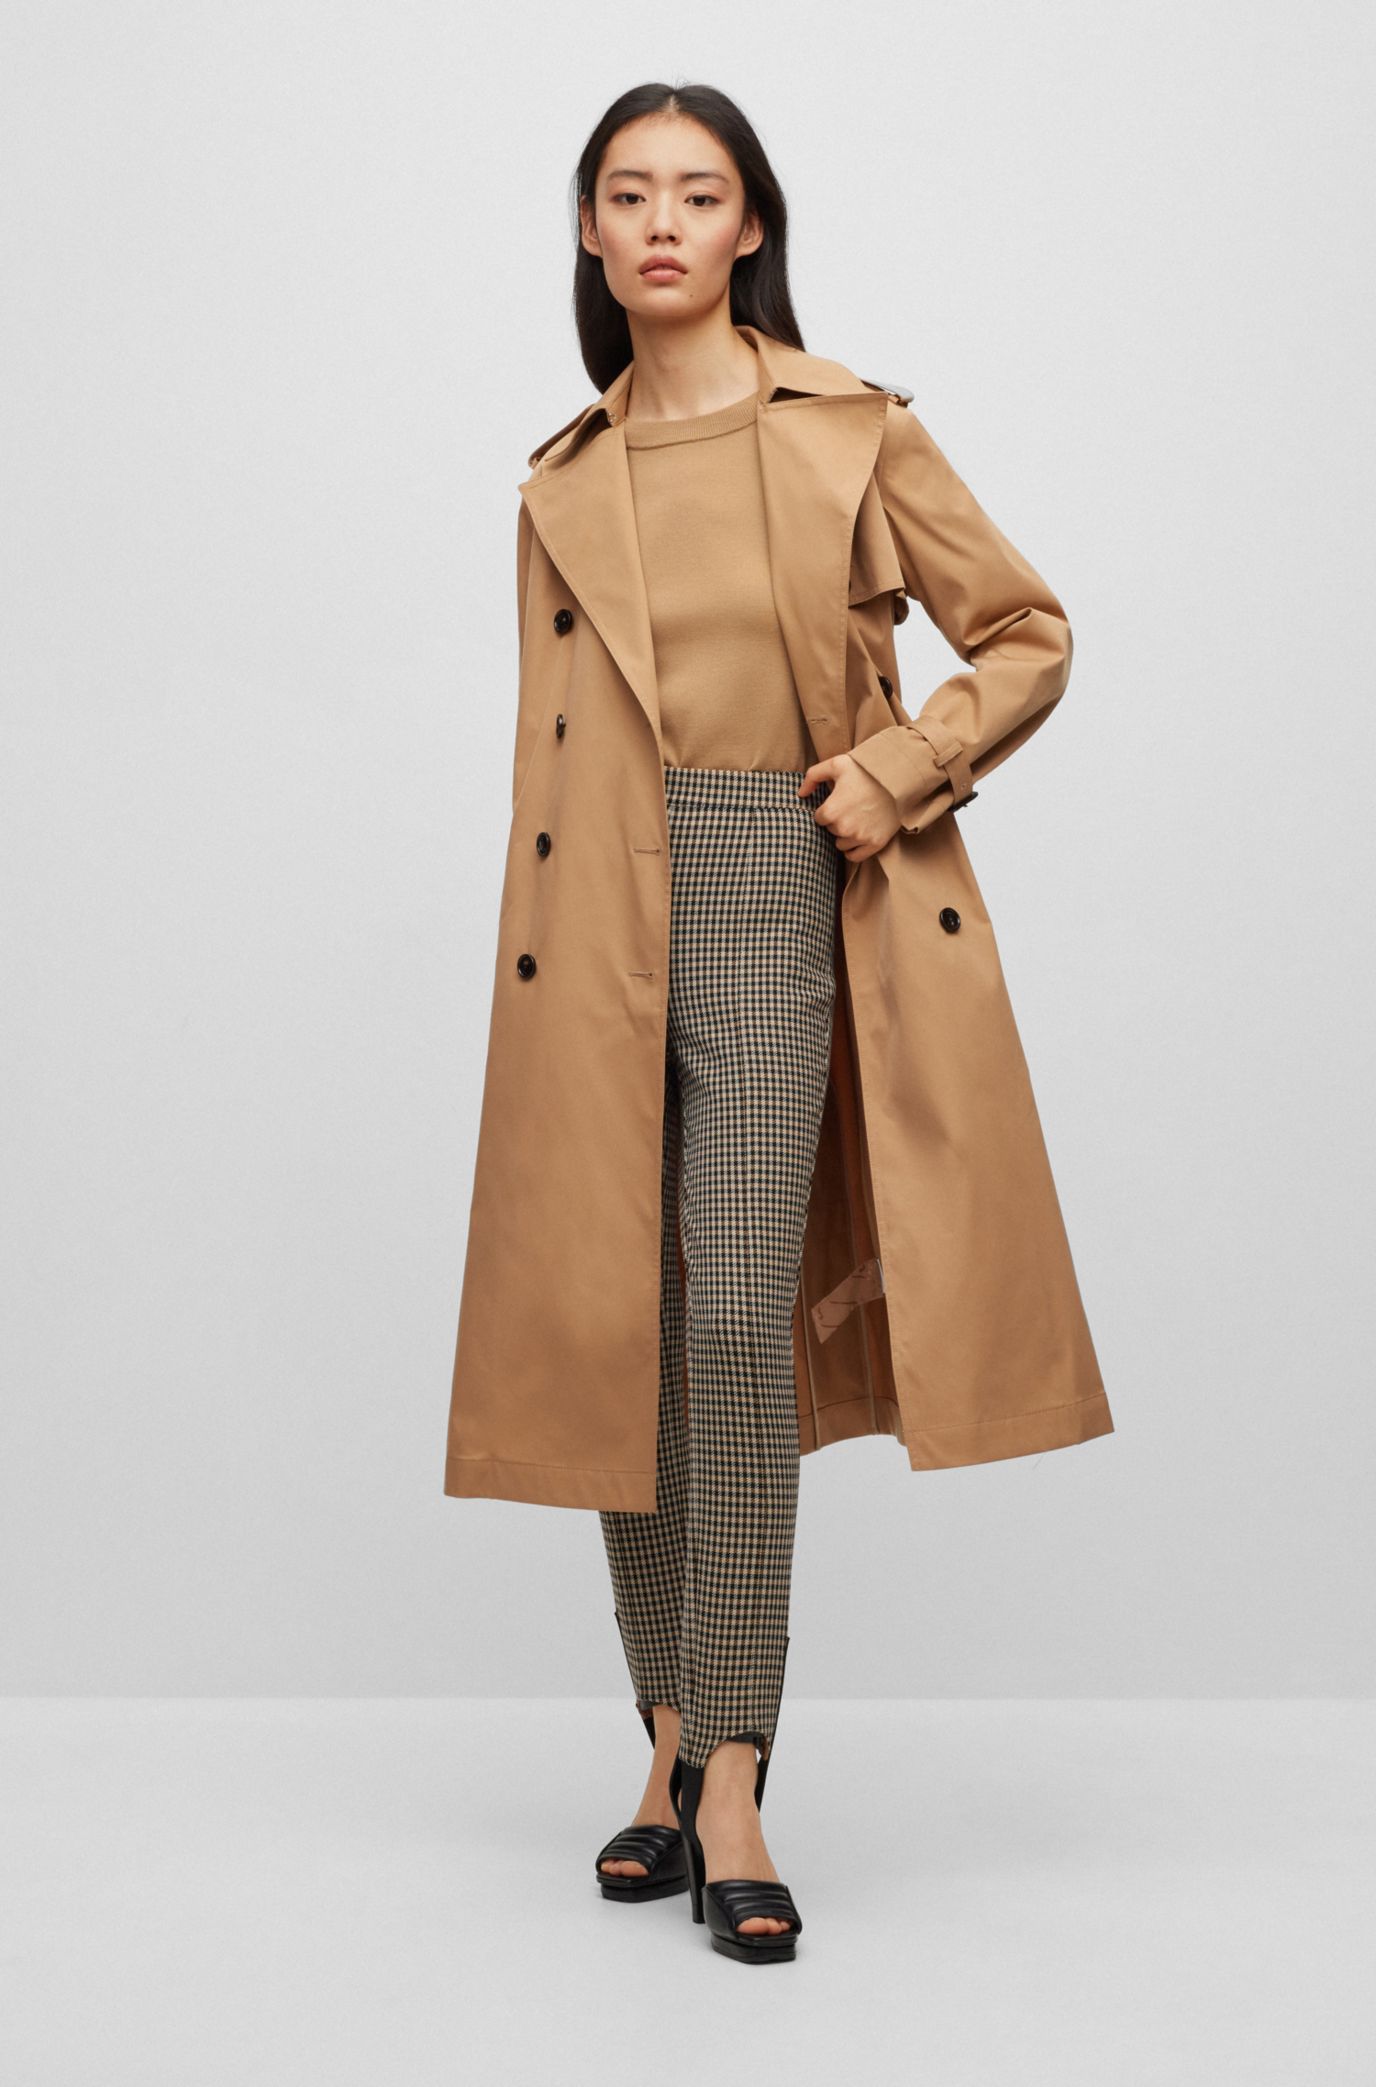  Women's 3/4 Length Double-Breasted Trench Coat with Belt Slim  Wool Trench Long Parka Coats Winter Maxi Jacket : Clothing, Shoes & Jewelry